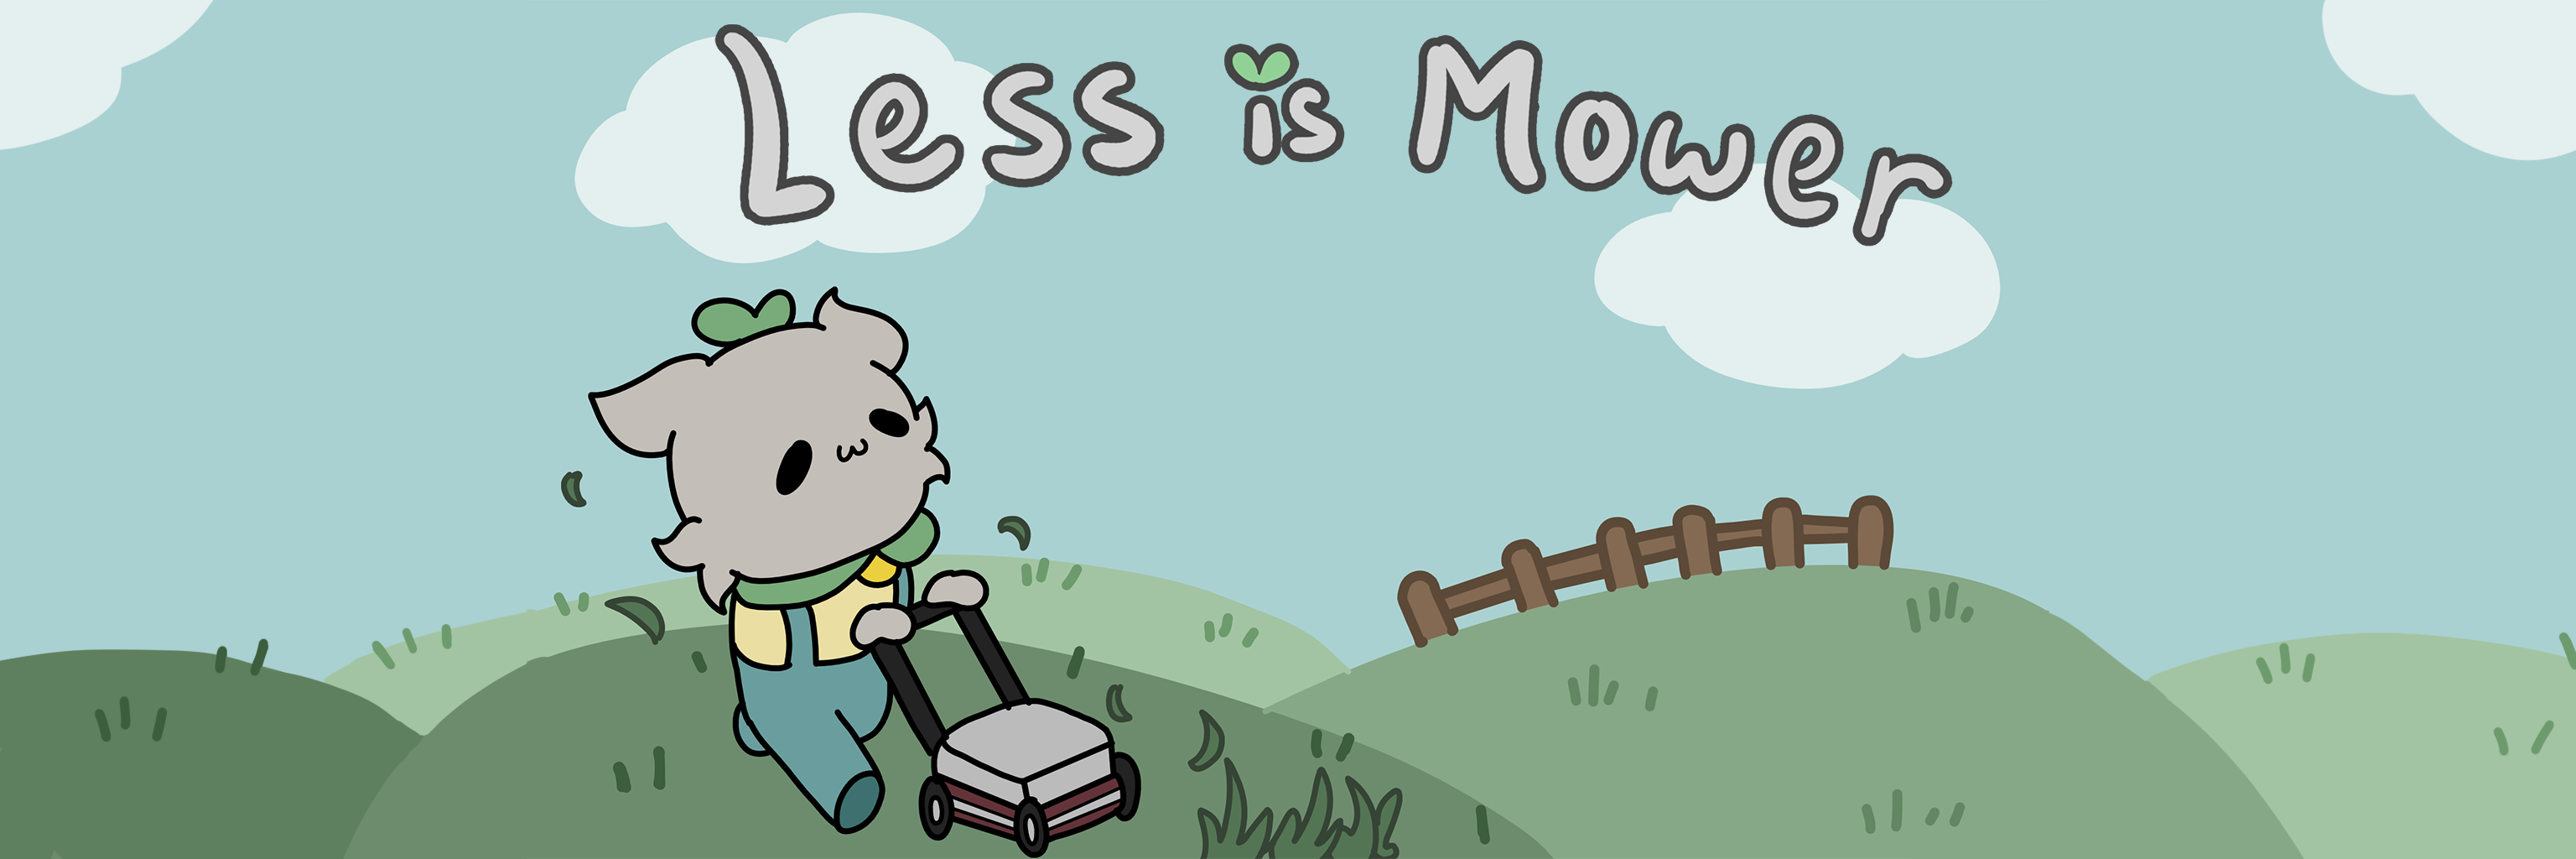 Less is Mower